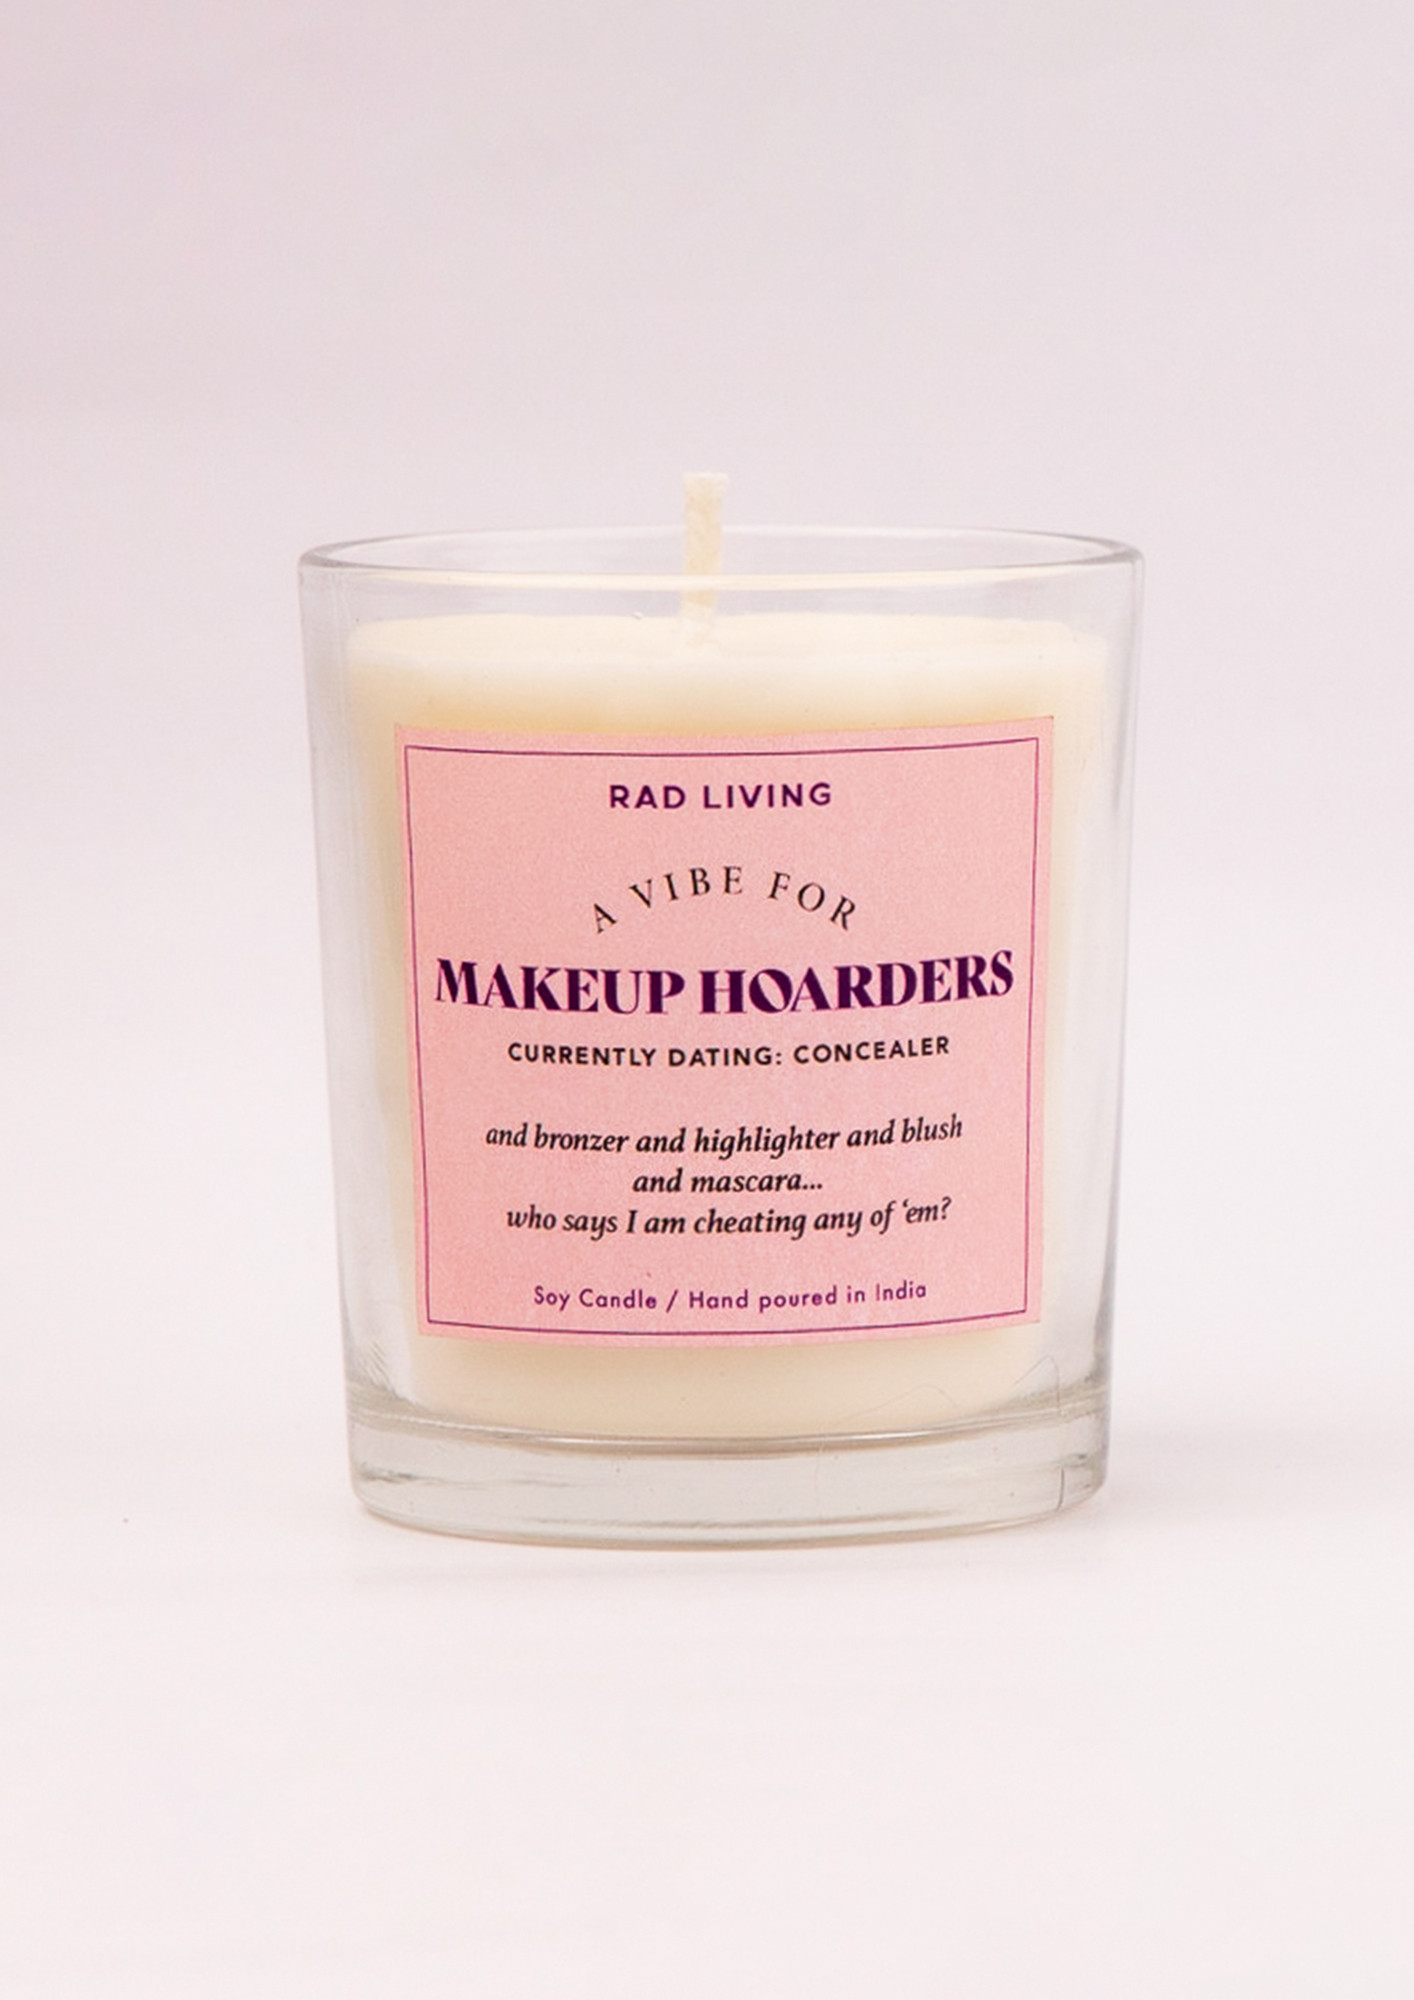 Makeup Hoarders - Almond and Shea Butter Scented Candle